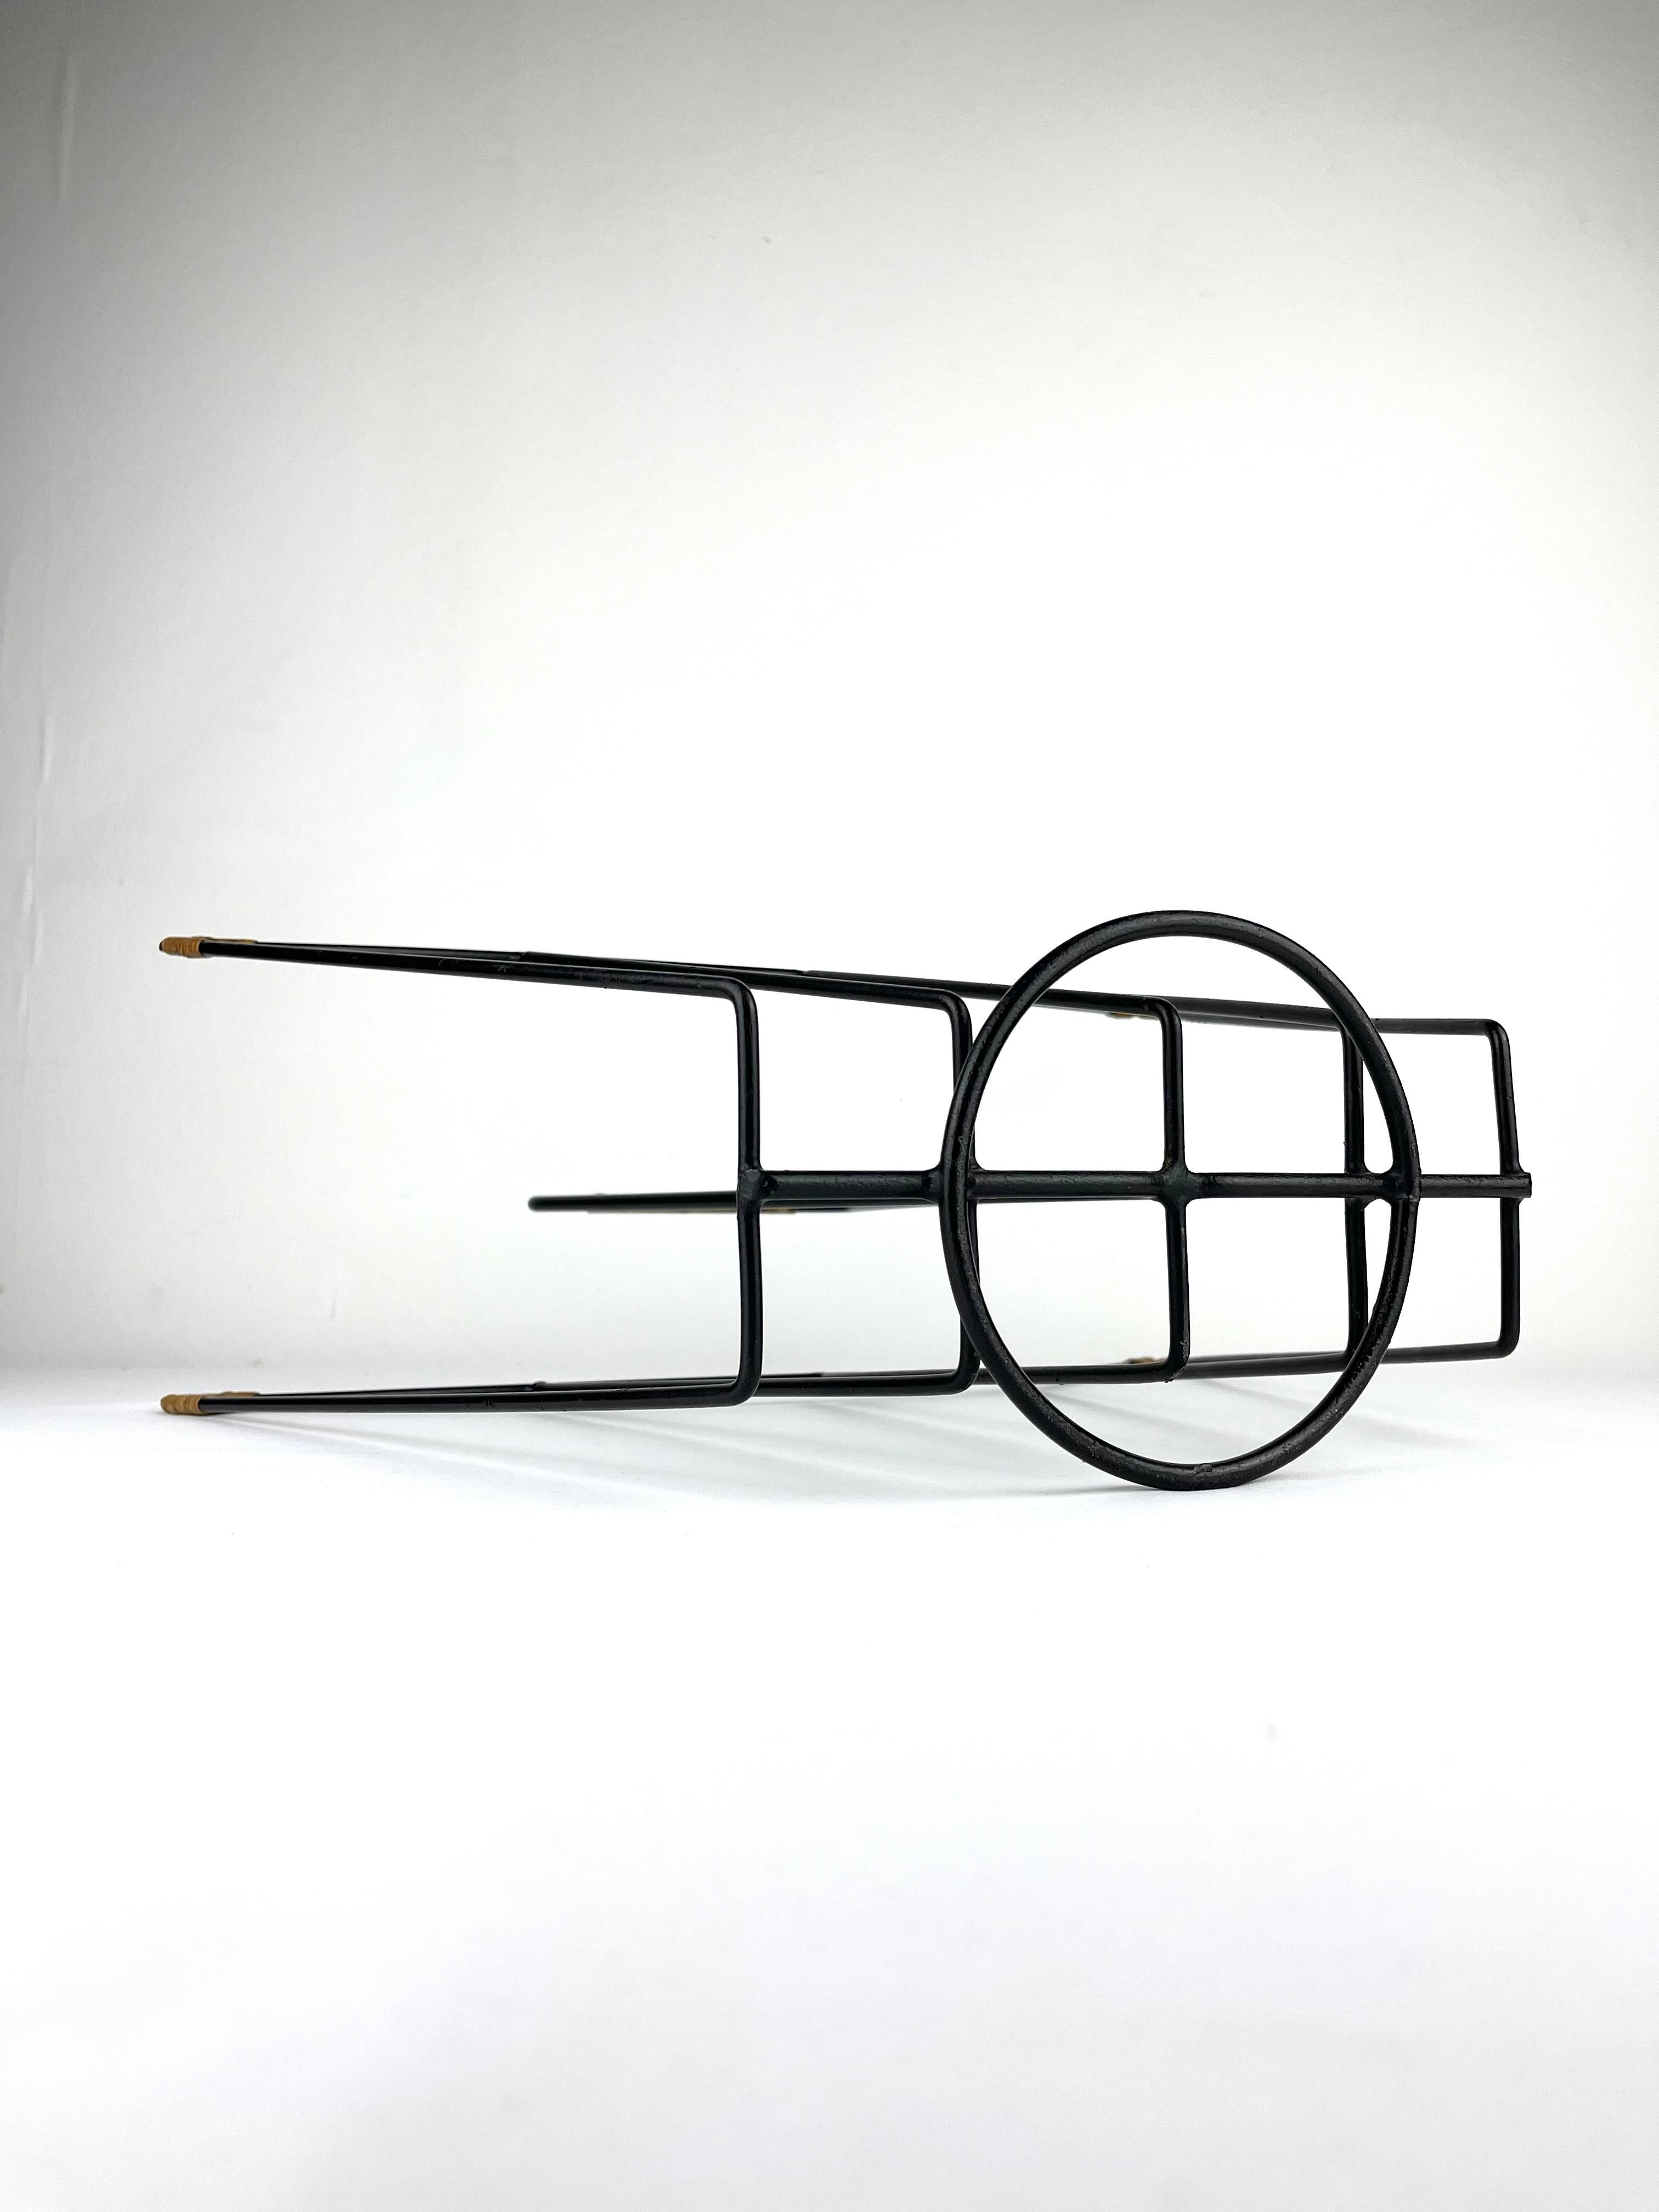 Sculptural 1950s metal magazine rack with twisted rattan details Laurids Lonborg For Sale 3